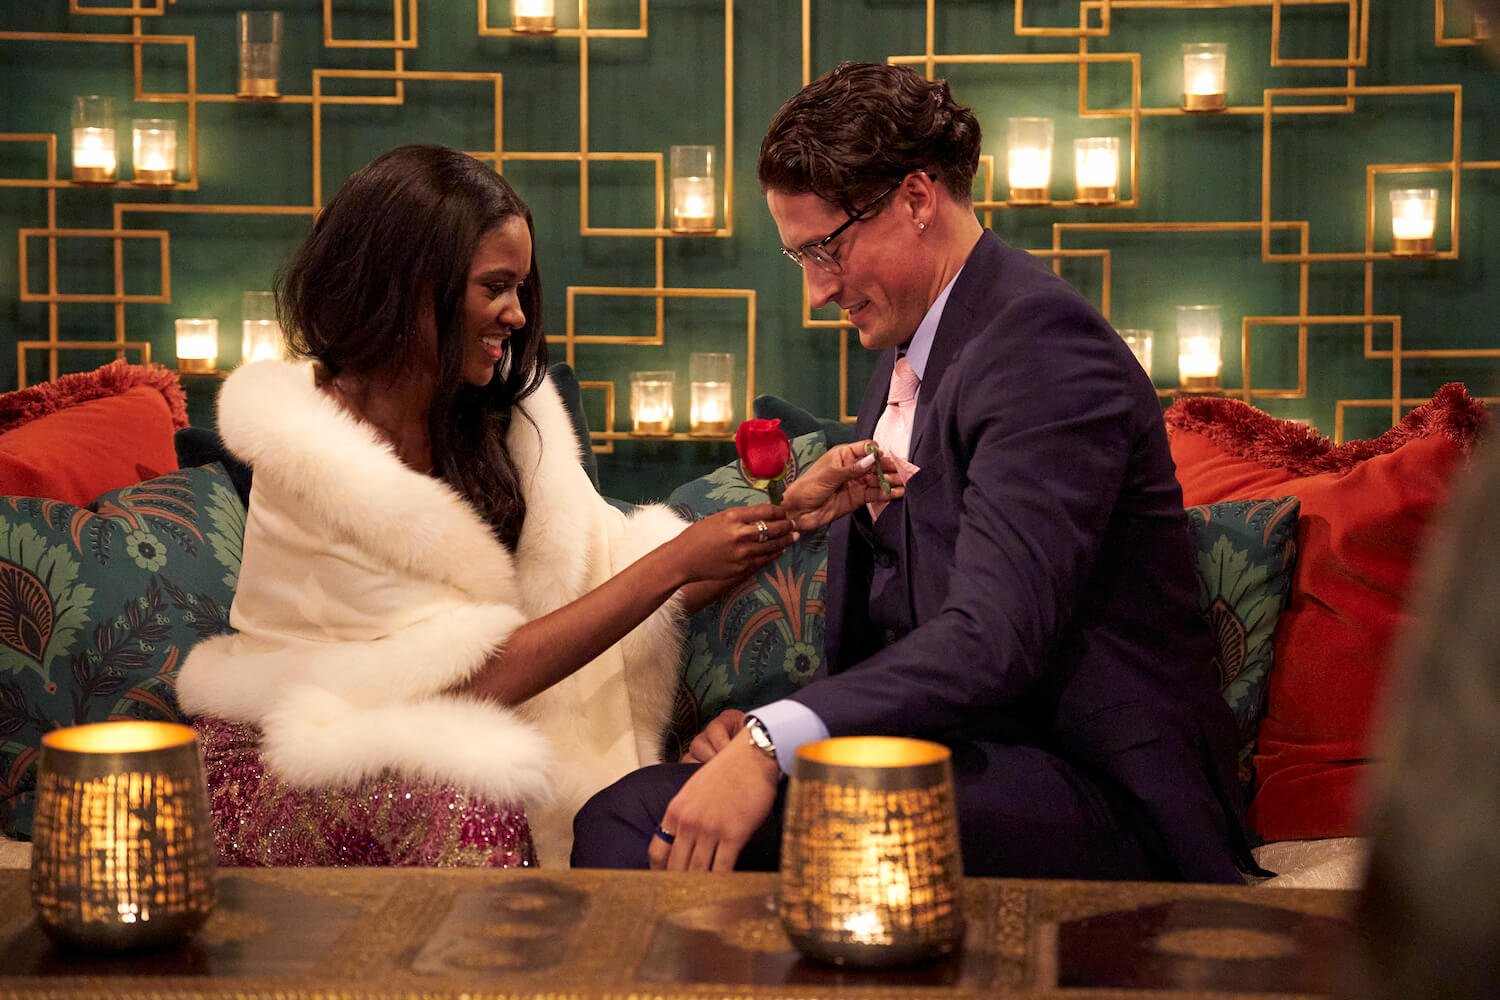 Charity Lawson clipping a rose on to Brayden Bowers' suit in 'The Bachelorette' 2023